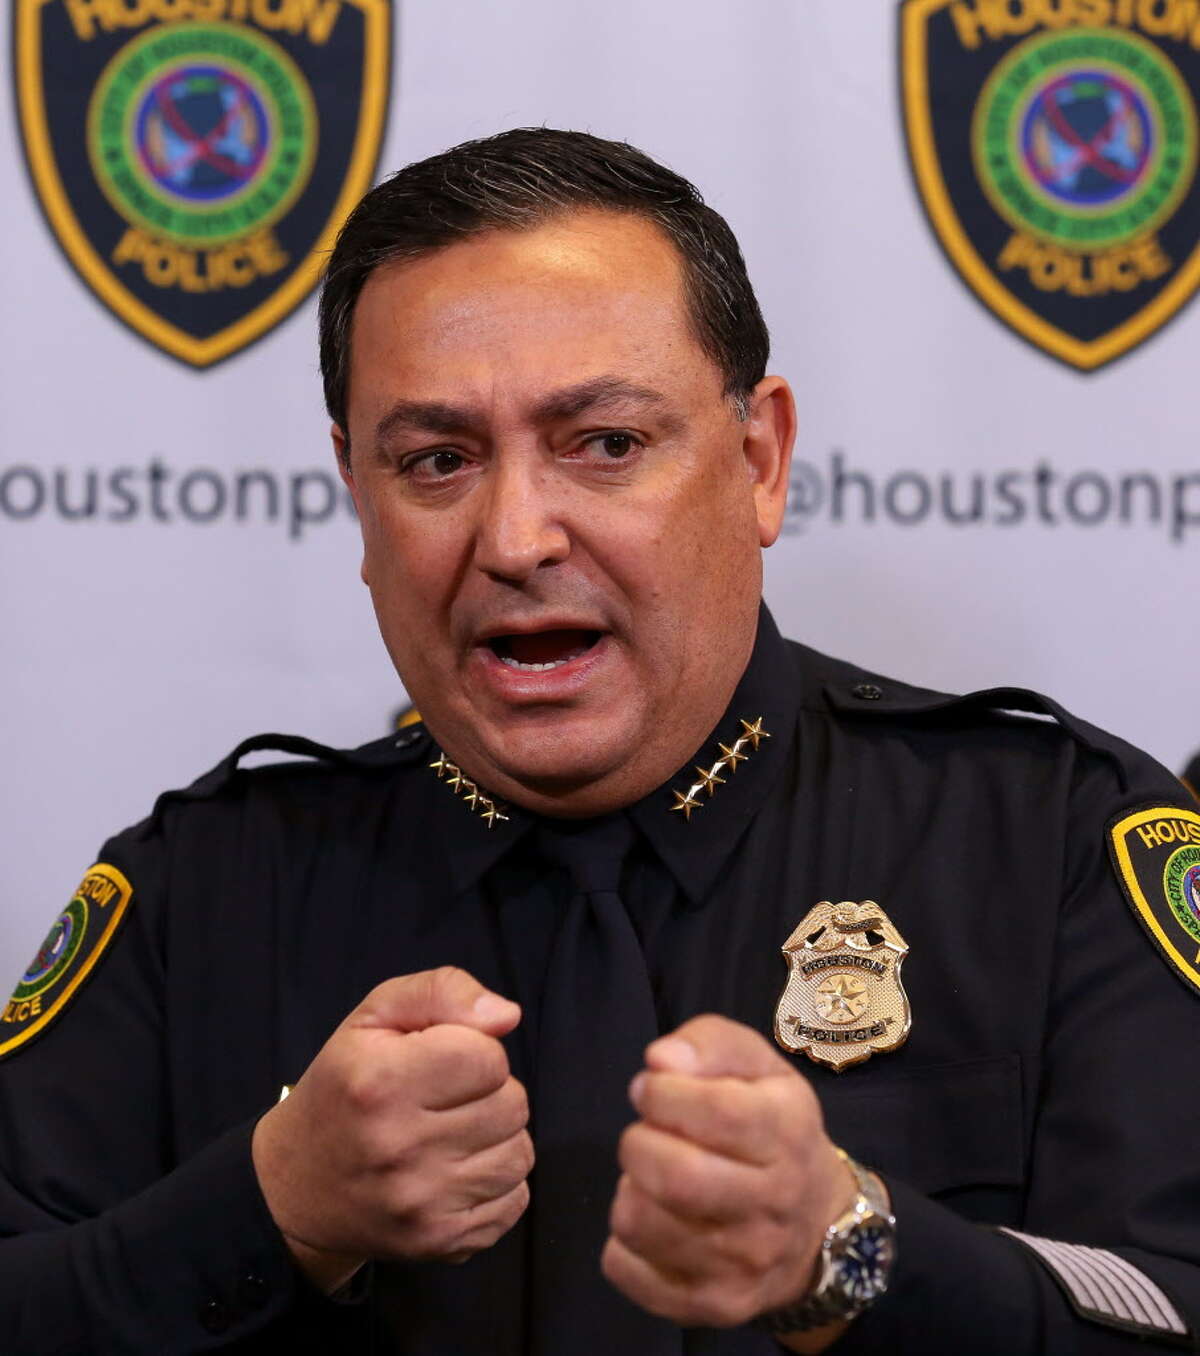 Houston Police Chief Art Acevedo explains what led up to the fatal shooting of a kidnapped man by an FBI agent during a press conference Tuesday, Jan. 30, 2018, in Houston. Acevedo explained the FBI SWAT team agent breached through a window with the front of his rifle, and felt pulling on the weapon from someone inside the room. The agent, fearful to lose his weapon decided to fire the rifle, shooting the kidnapping victim, Ulises Valladares.